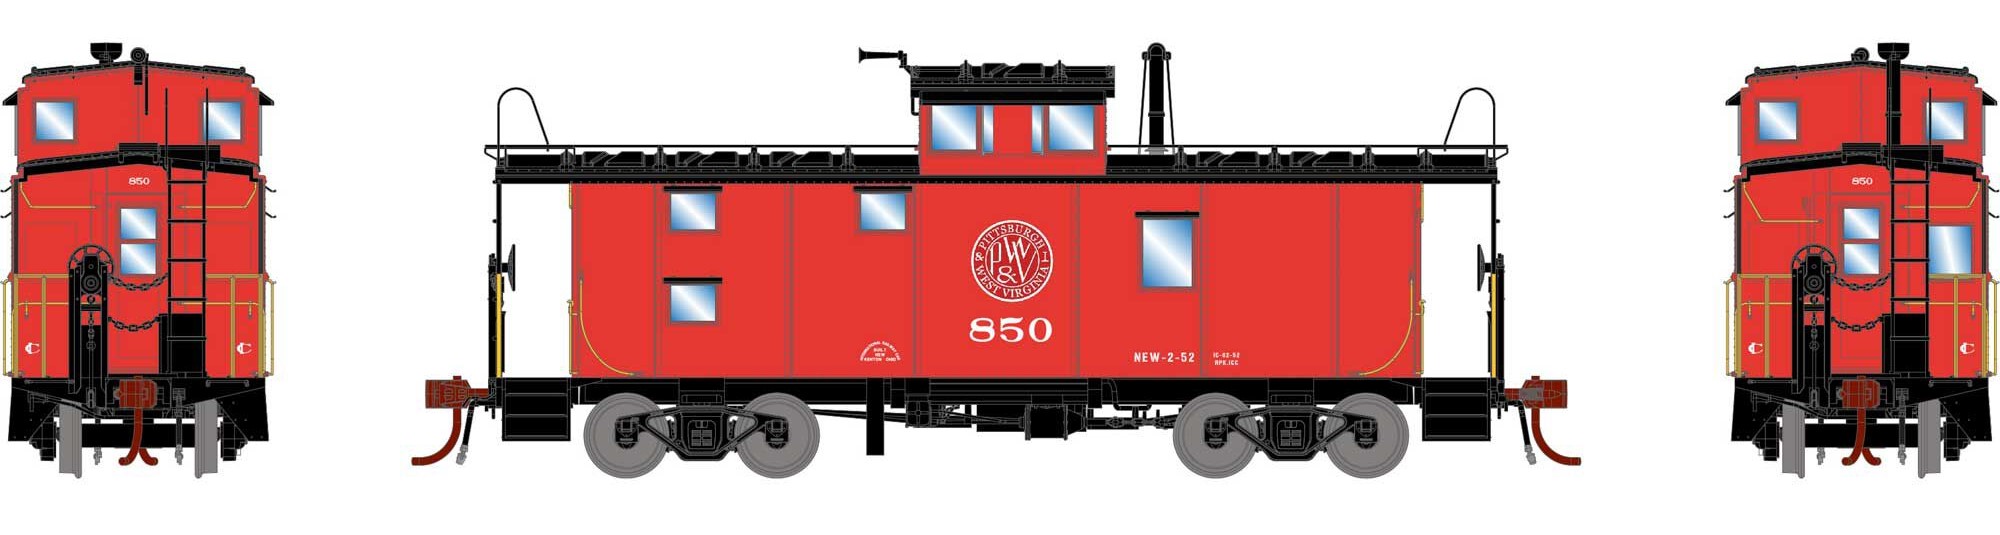 Athearn Genesis HO ATHG78385 DCC/Tsunami Soundcar Equipped ICC Caboose with Lights & Sound Pittsburgh & West Virginia P&WV #850